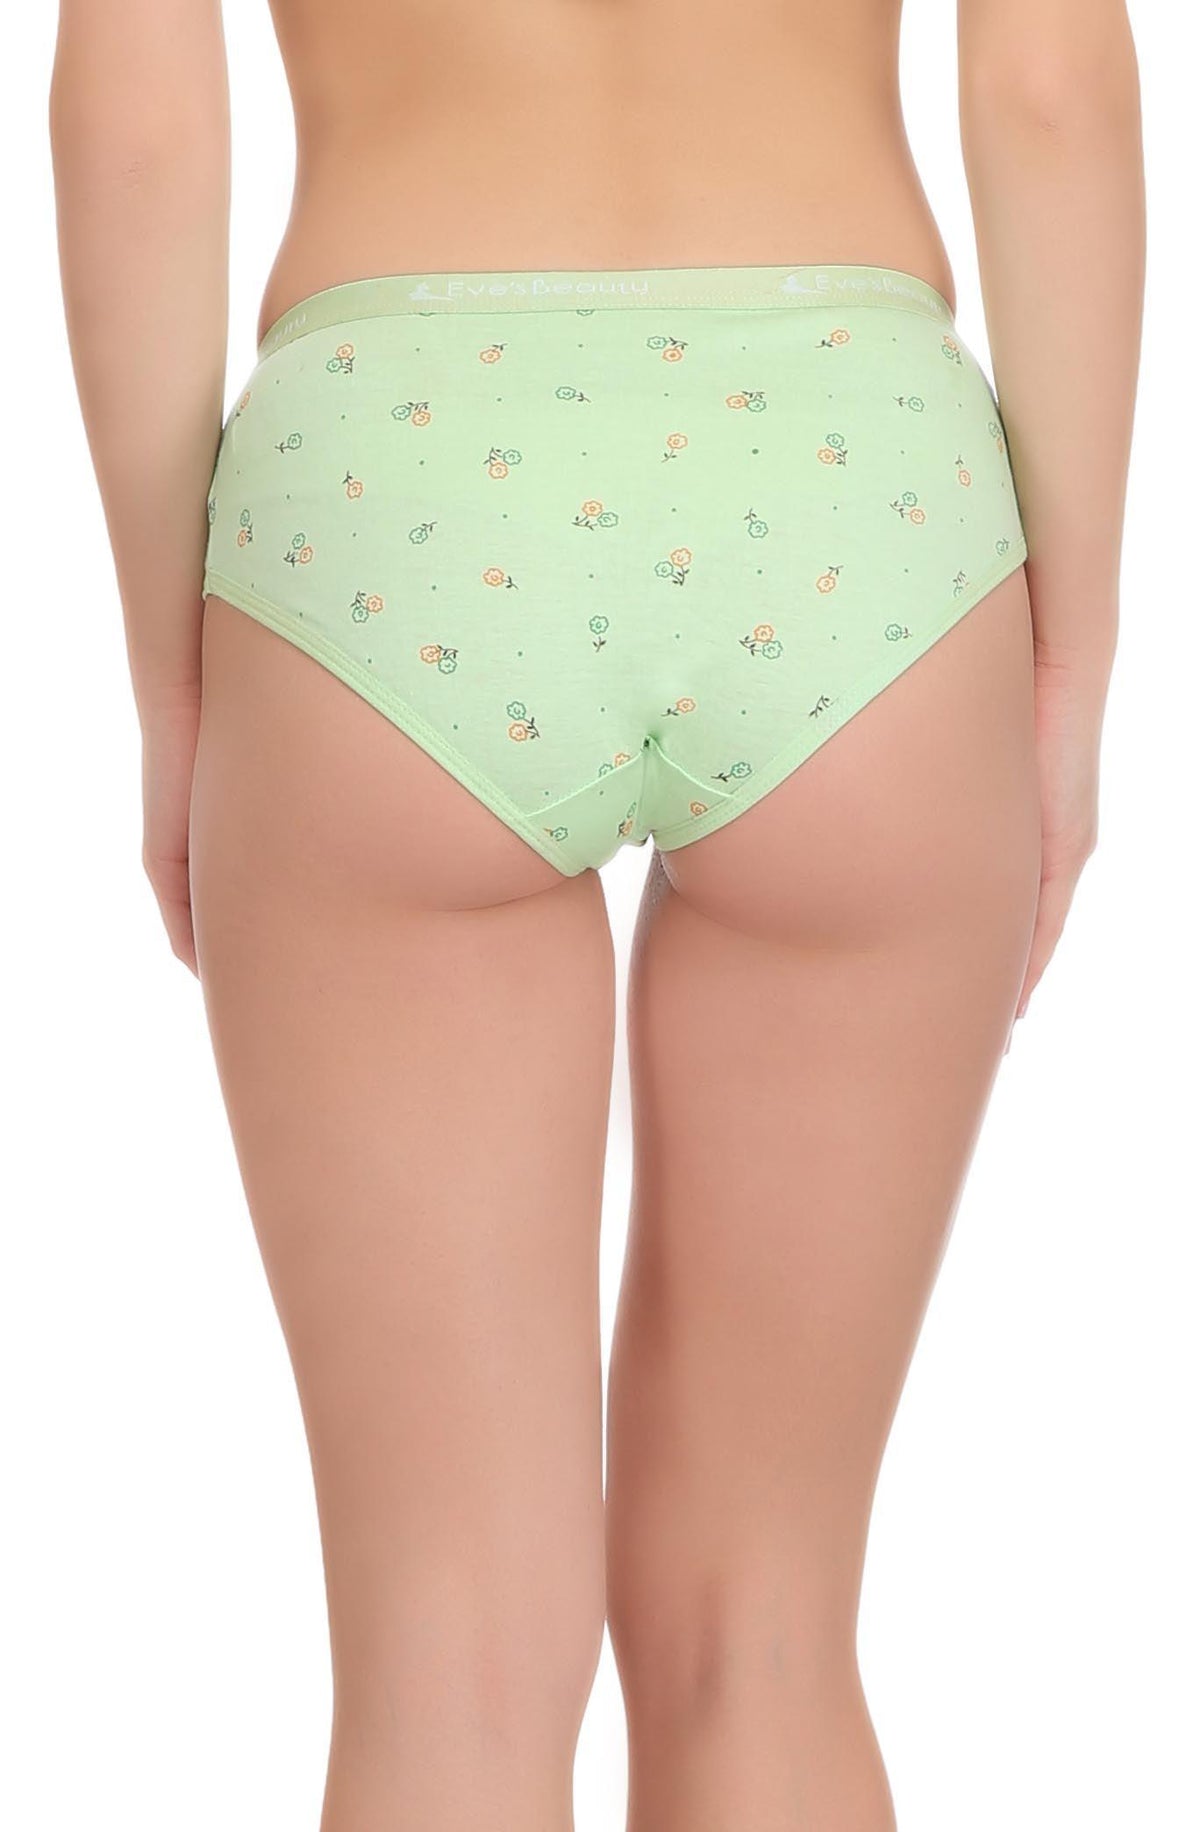 Product Name: *Women Hipster Multicolor Cotton Blend Panty (Pack of 2)